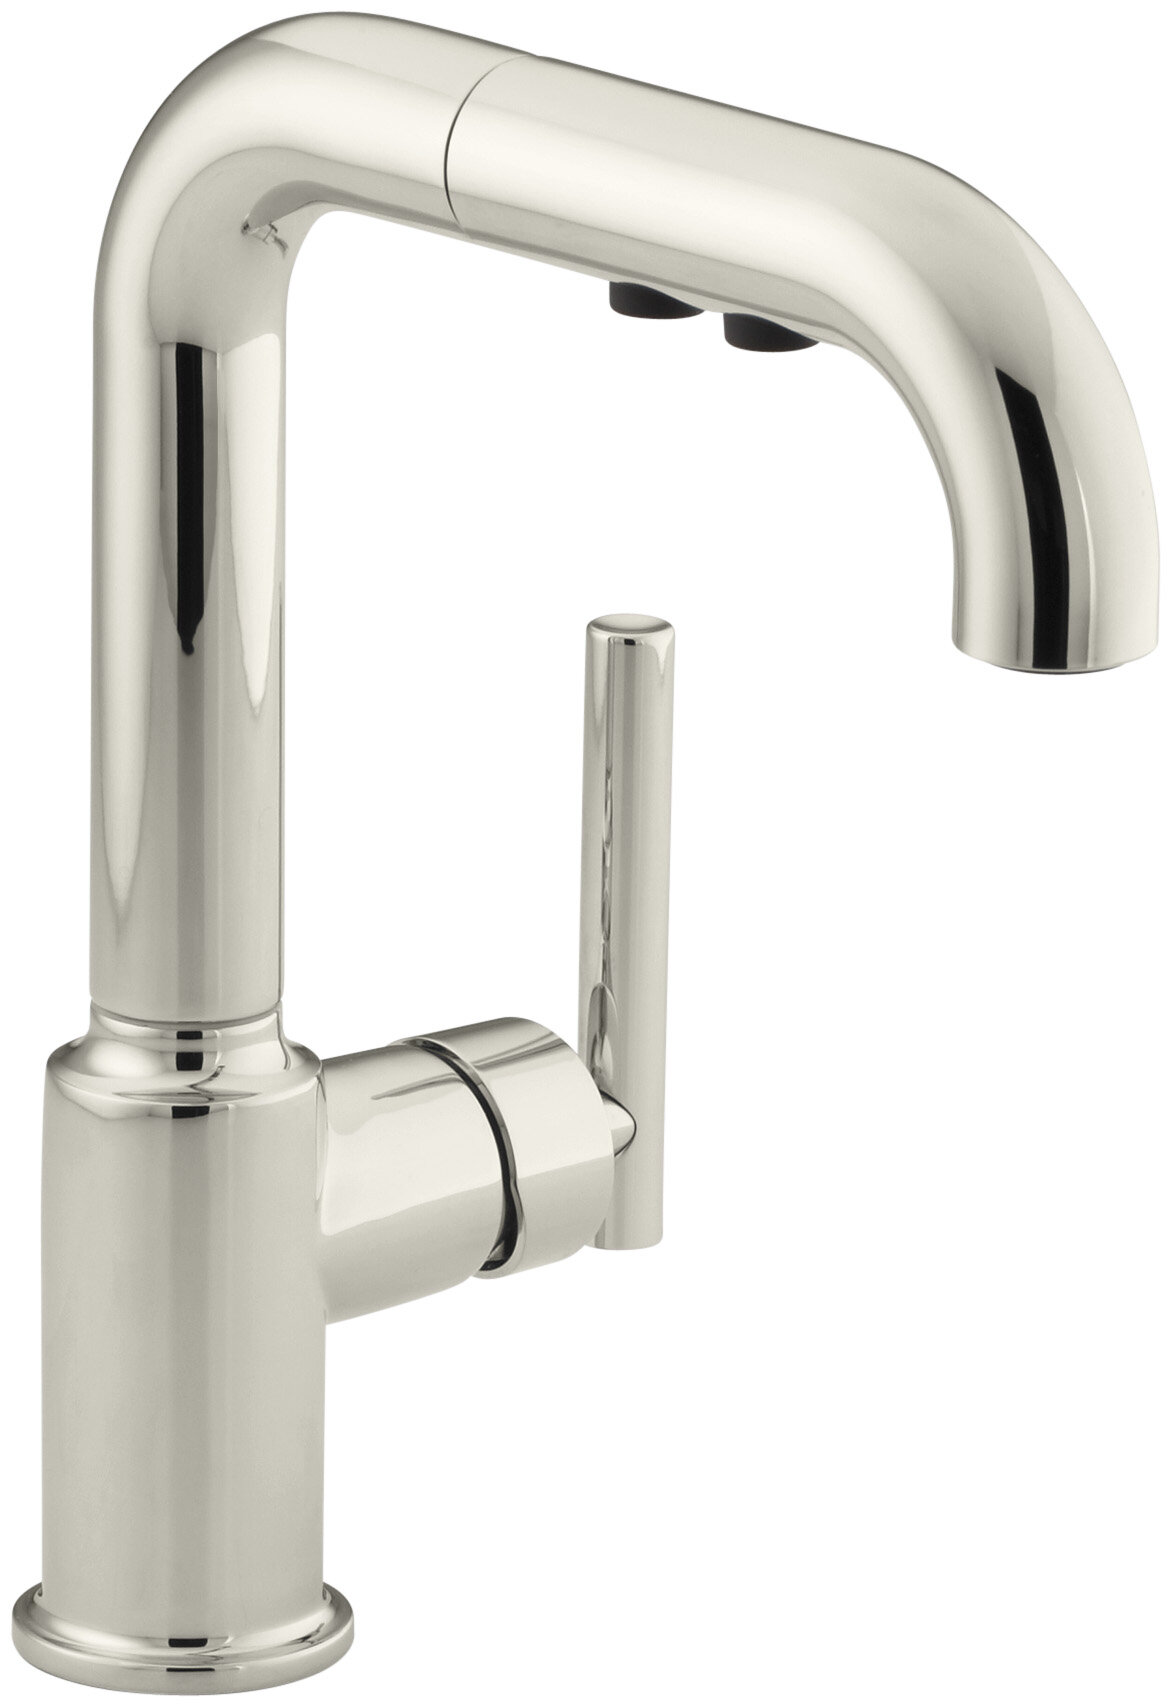 Purist Single Handle Kitchen Faucet With 7 Pullout Spout With ProMotion Reviews AllModern